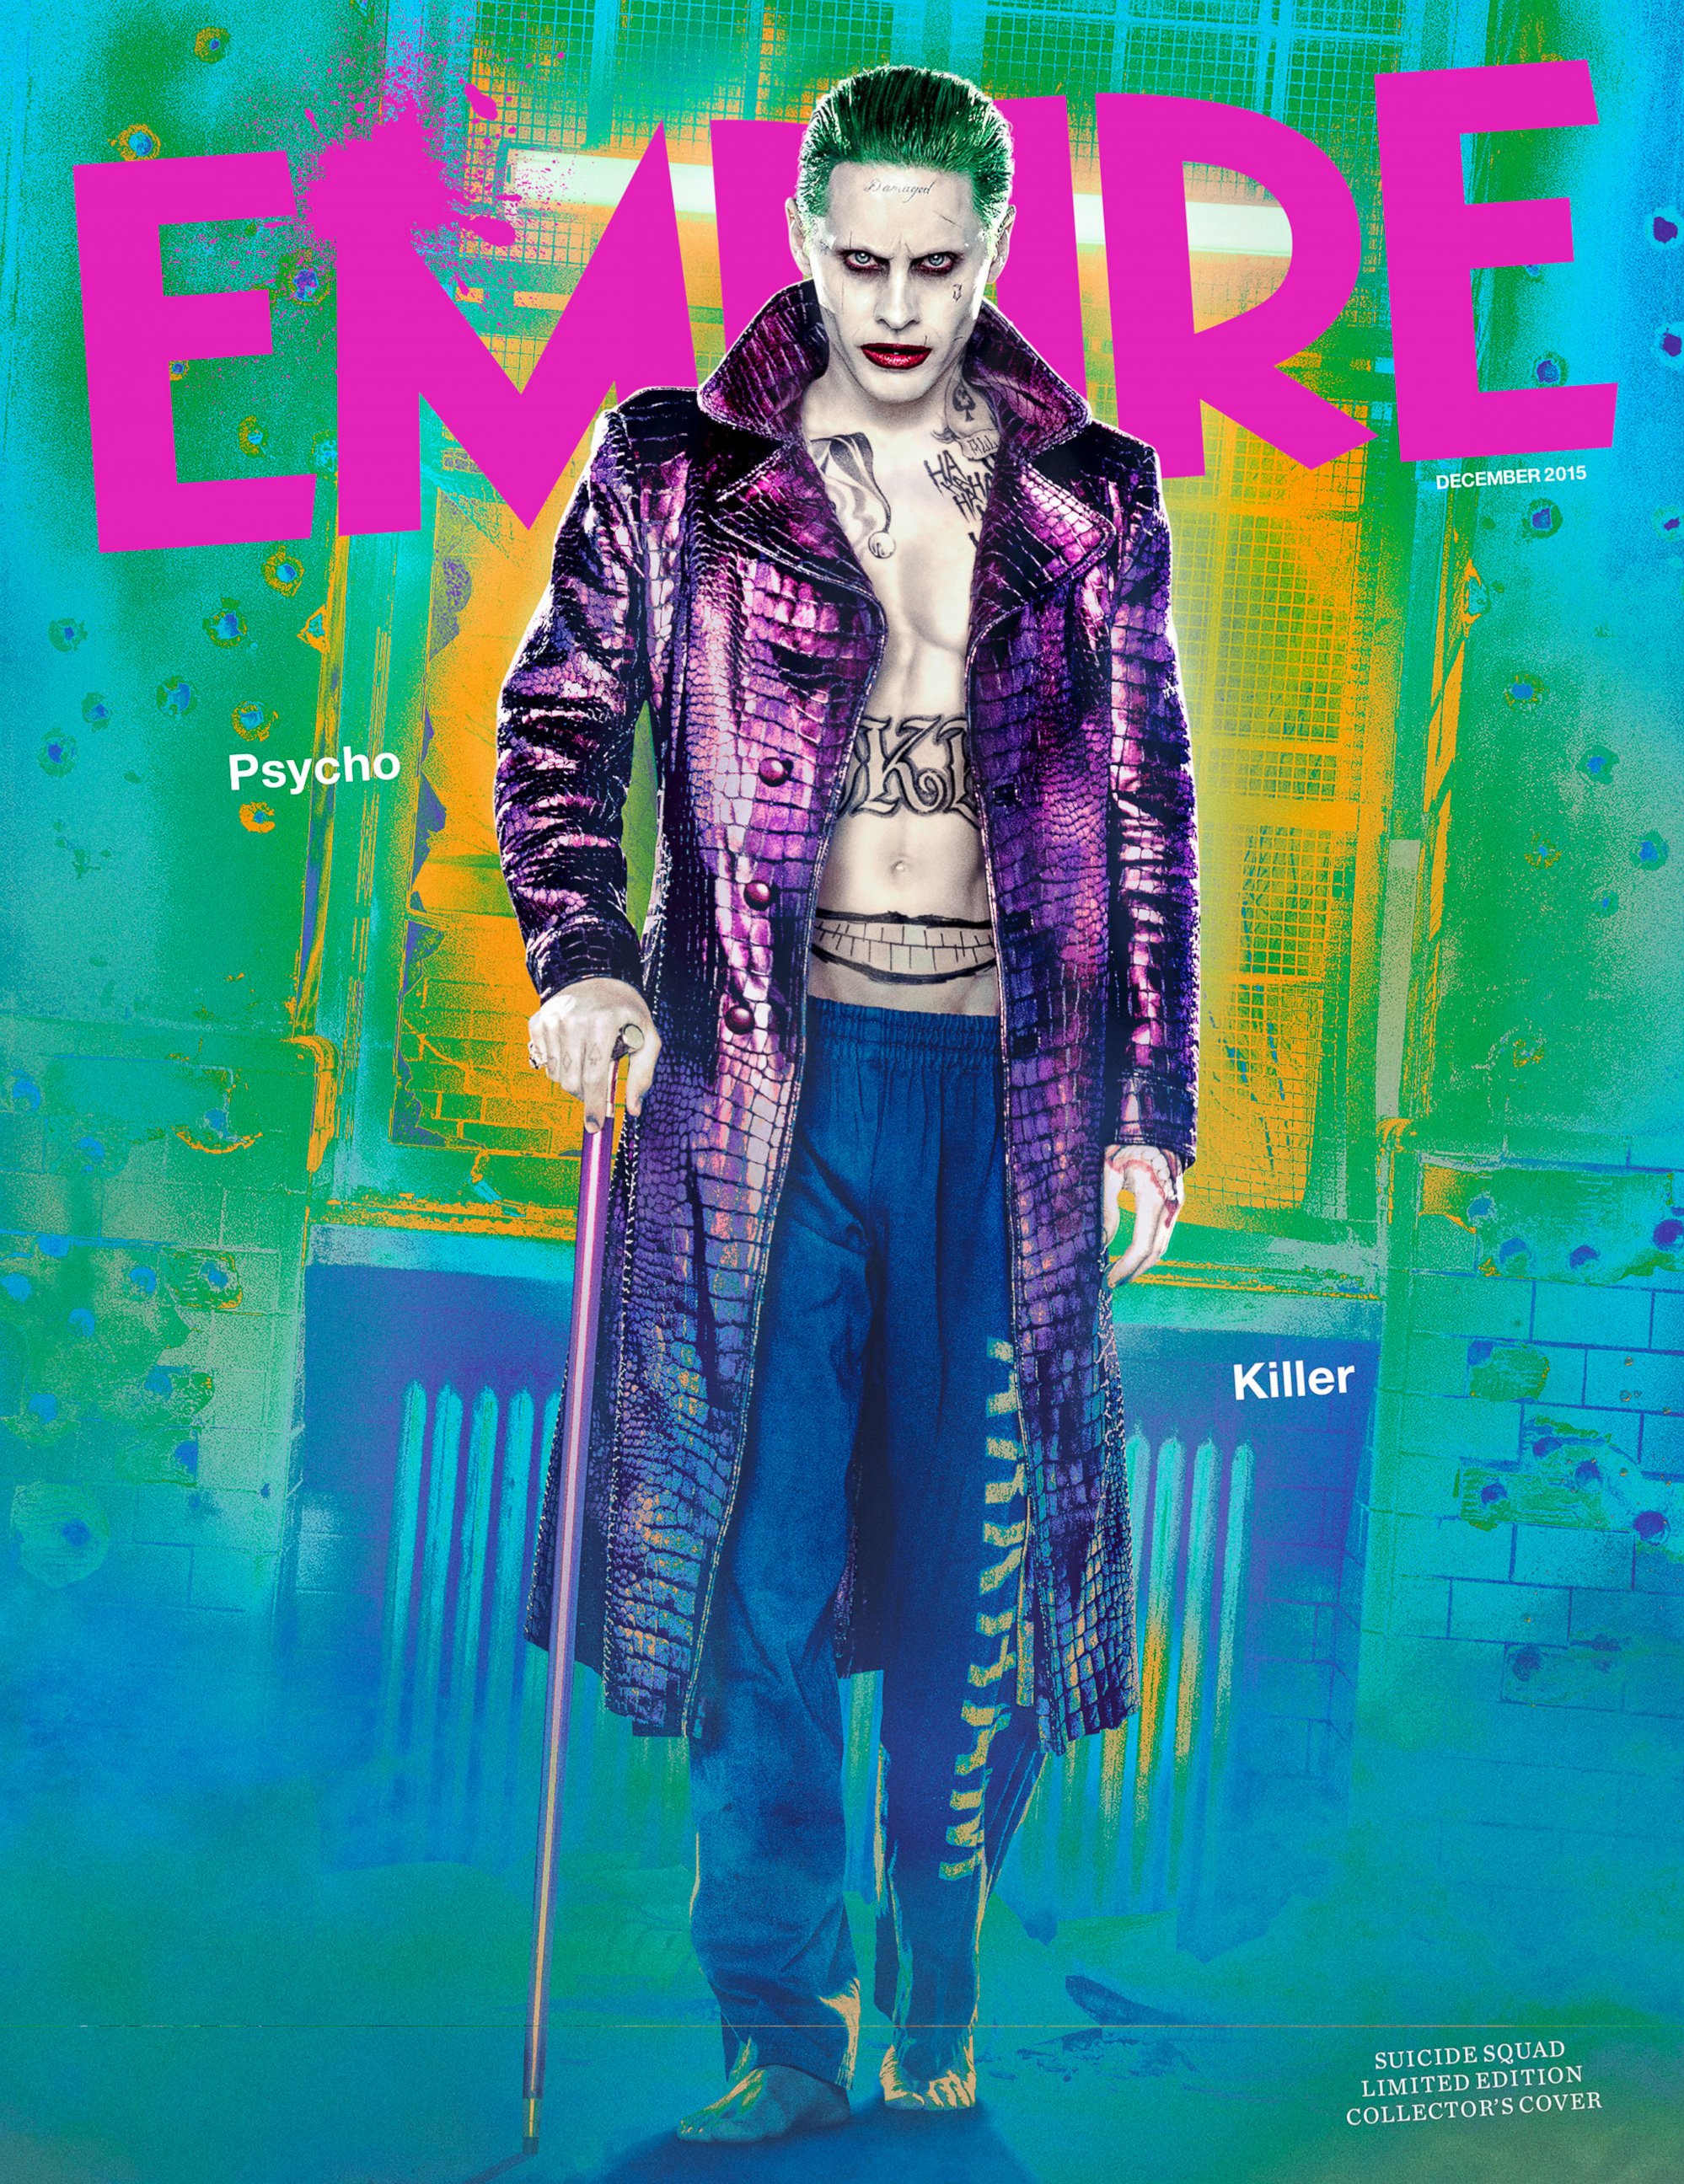 PHOTO: Jared Leto in full costume as his "Suicide Squad" character Joker on the cover of Empire.